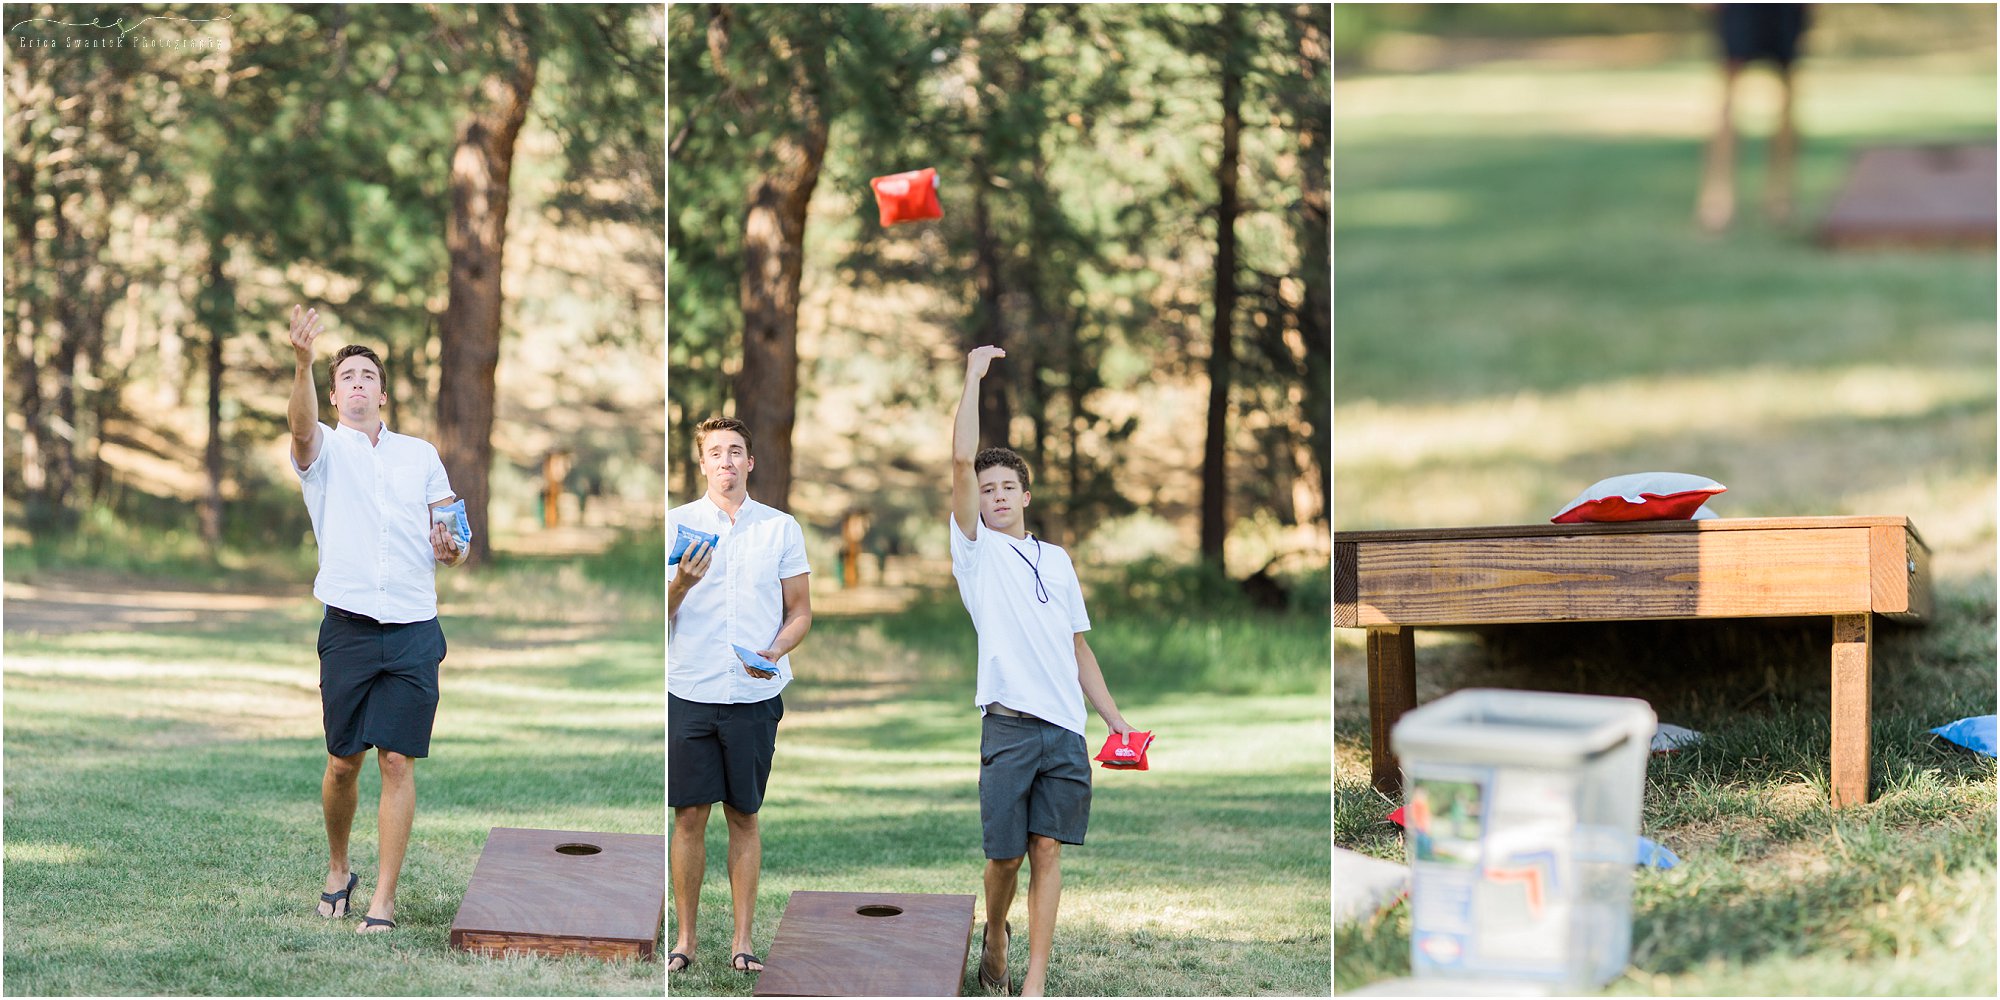 Lawn games are such a hit at your outdoor Bend, Oregon wedding. | Erica Swantek Photography